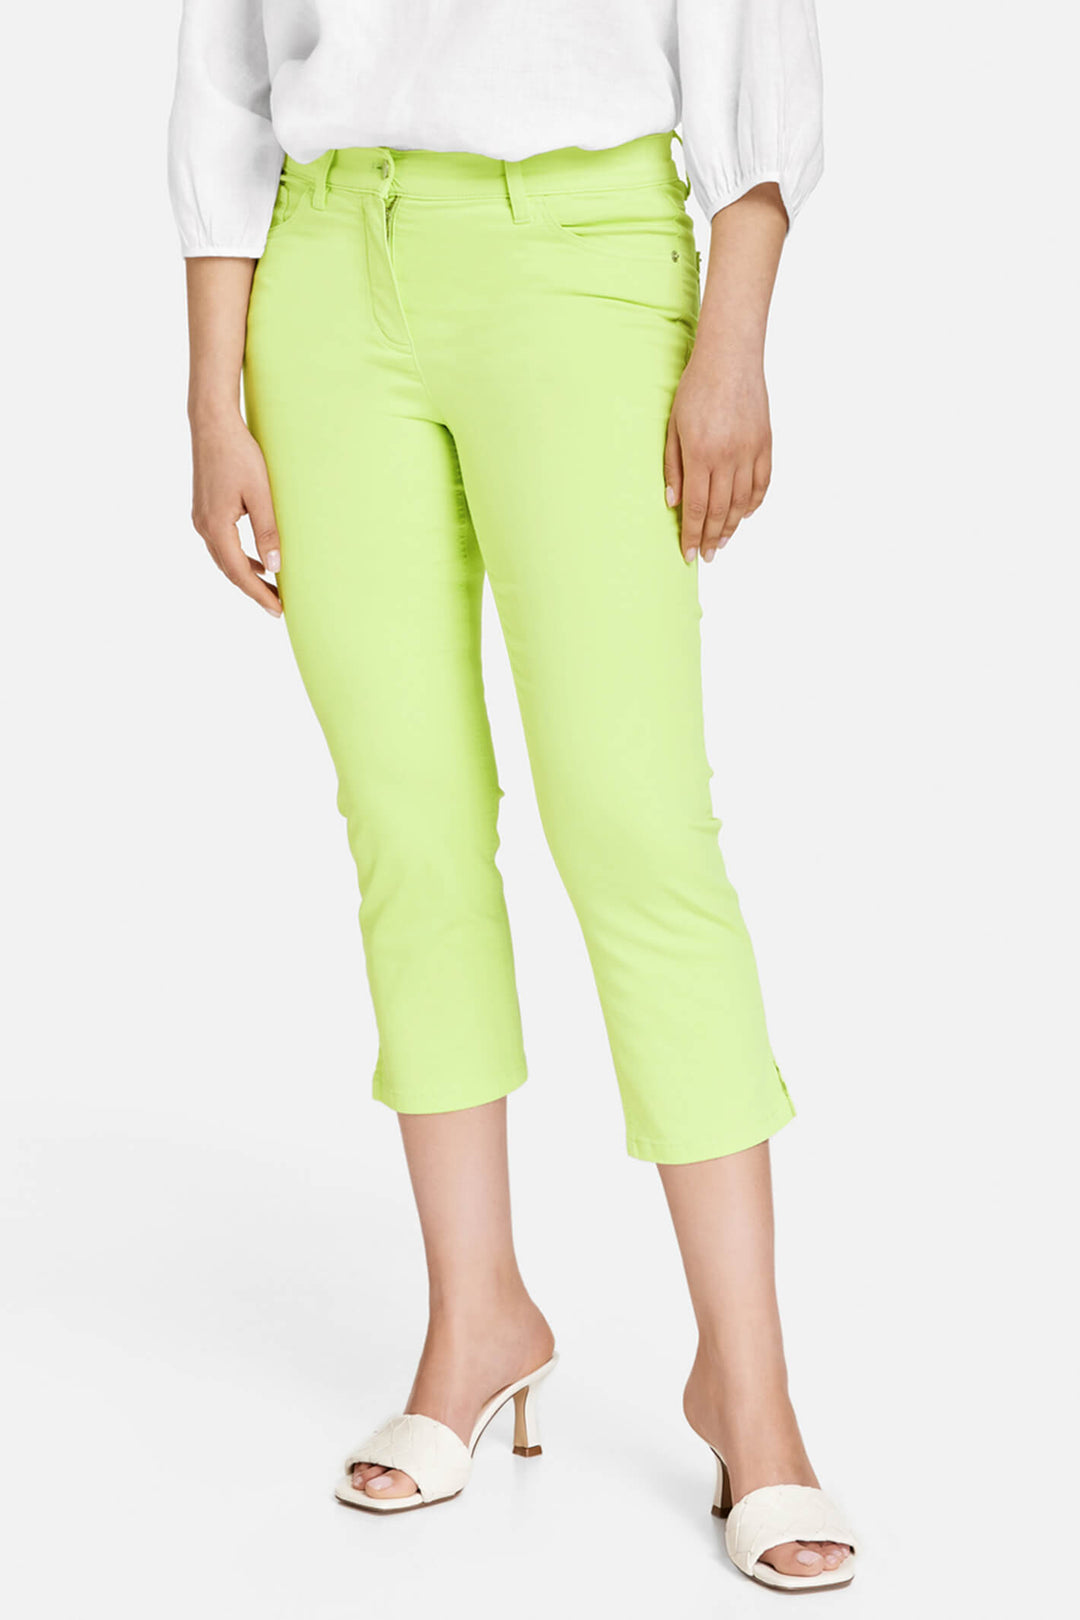 Gerry Weber 822097 Light Lime Green Best4me Cropped Trousers - Experience Boutique